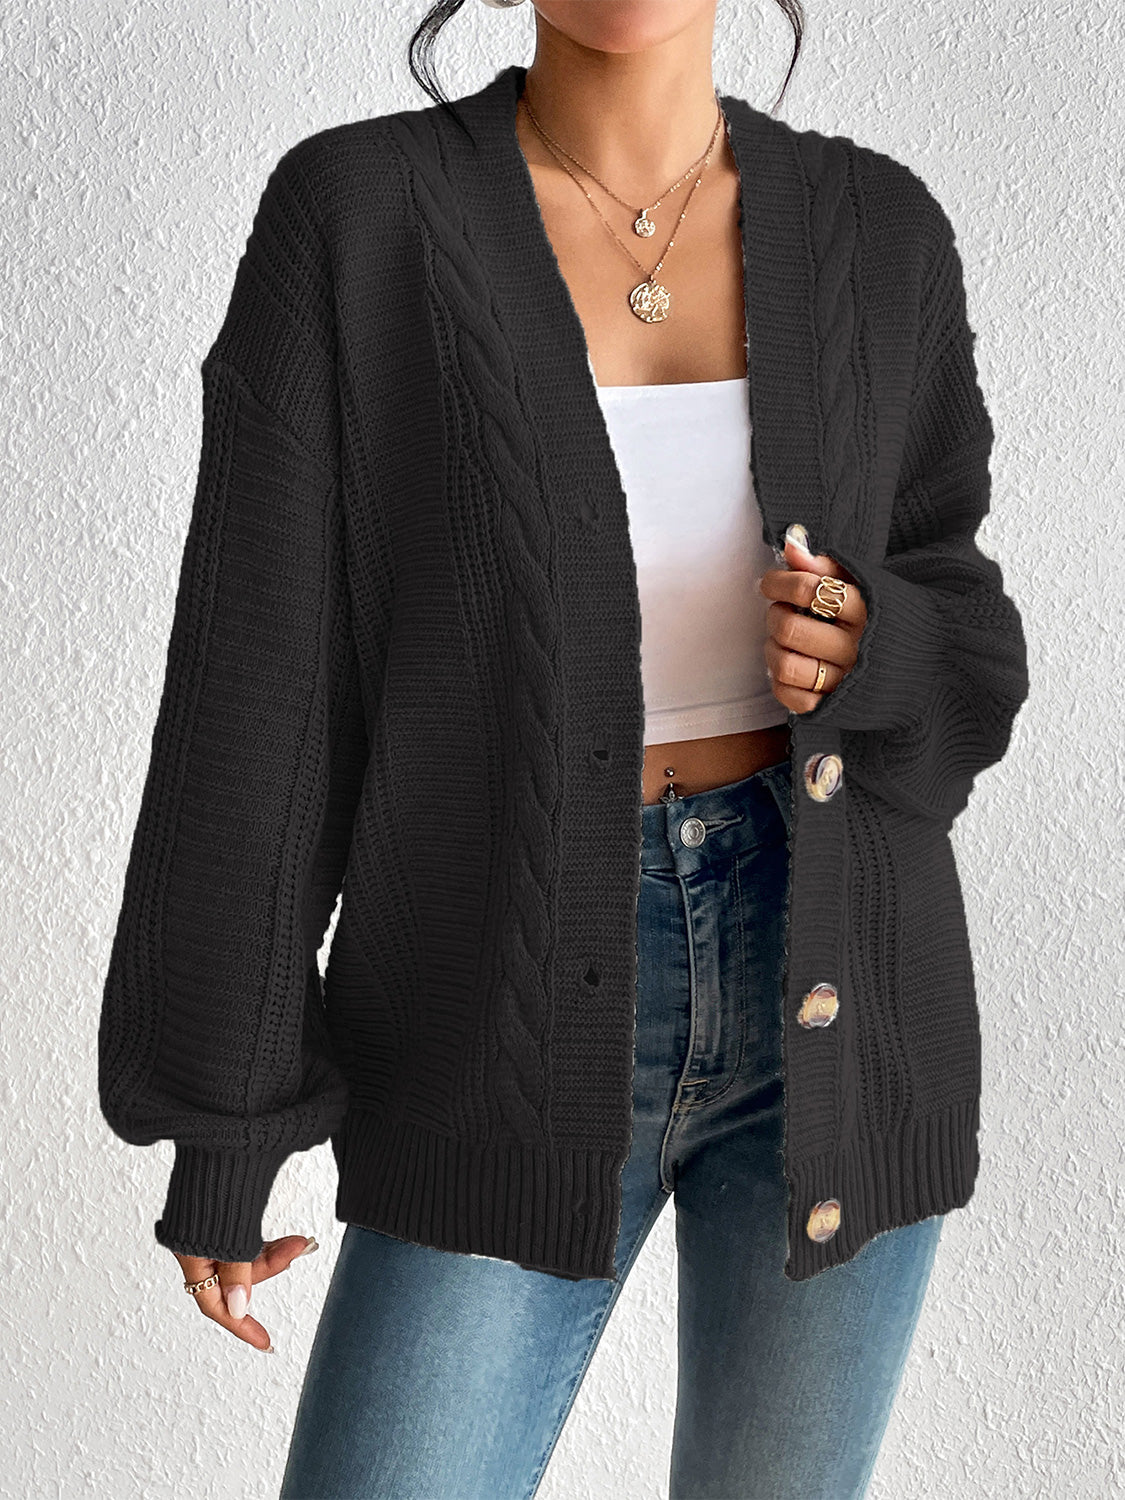 Cable-Knit Button Down Cardigan - Black / S - Women’s Clothing & Accessories - Shirts & Tops - 4 - 2024